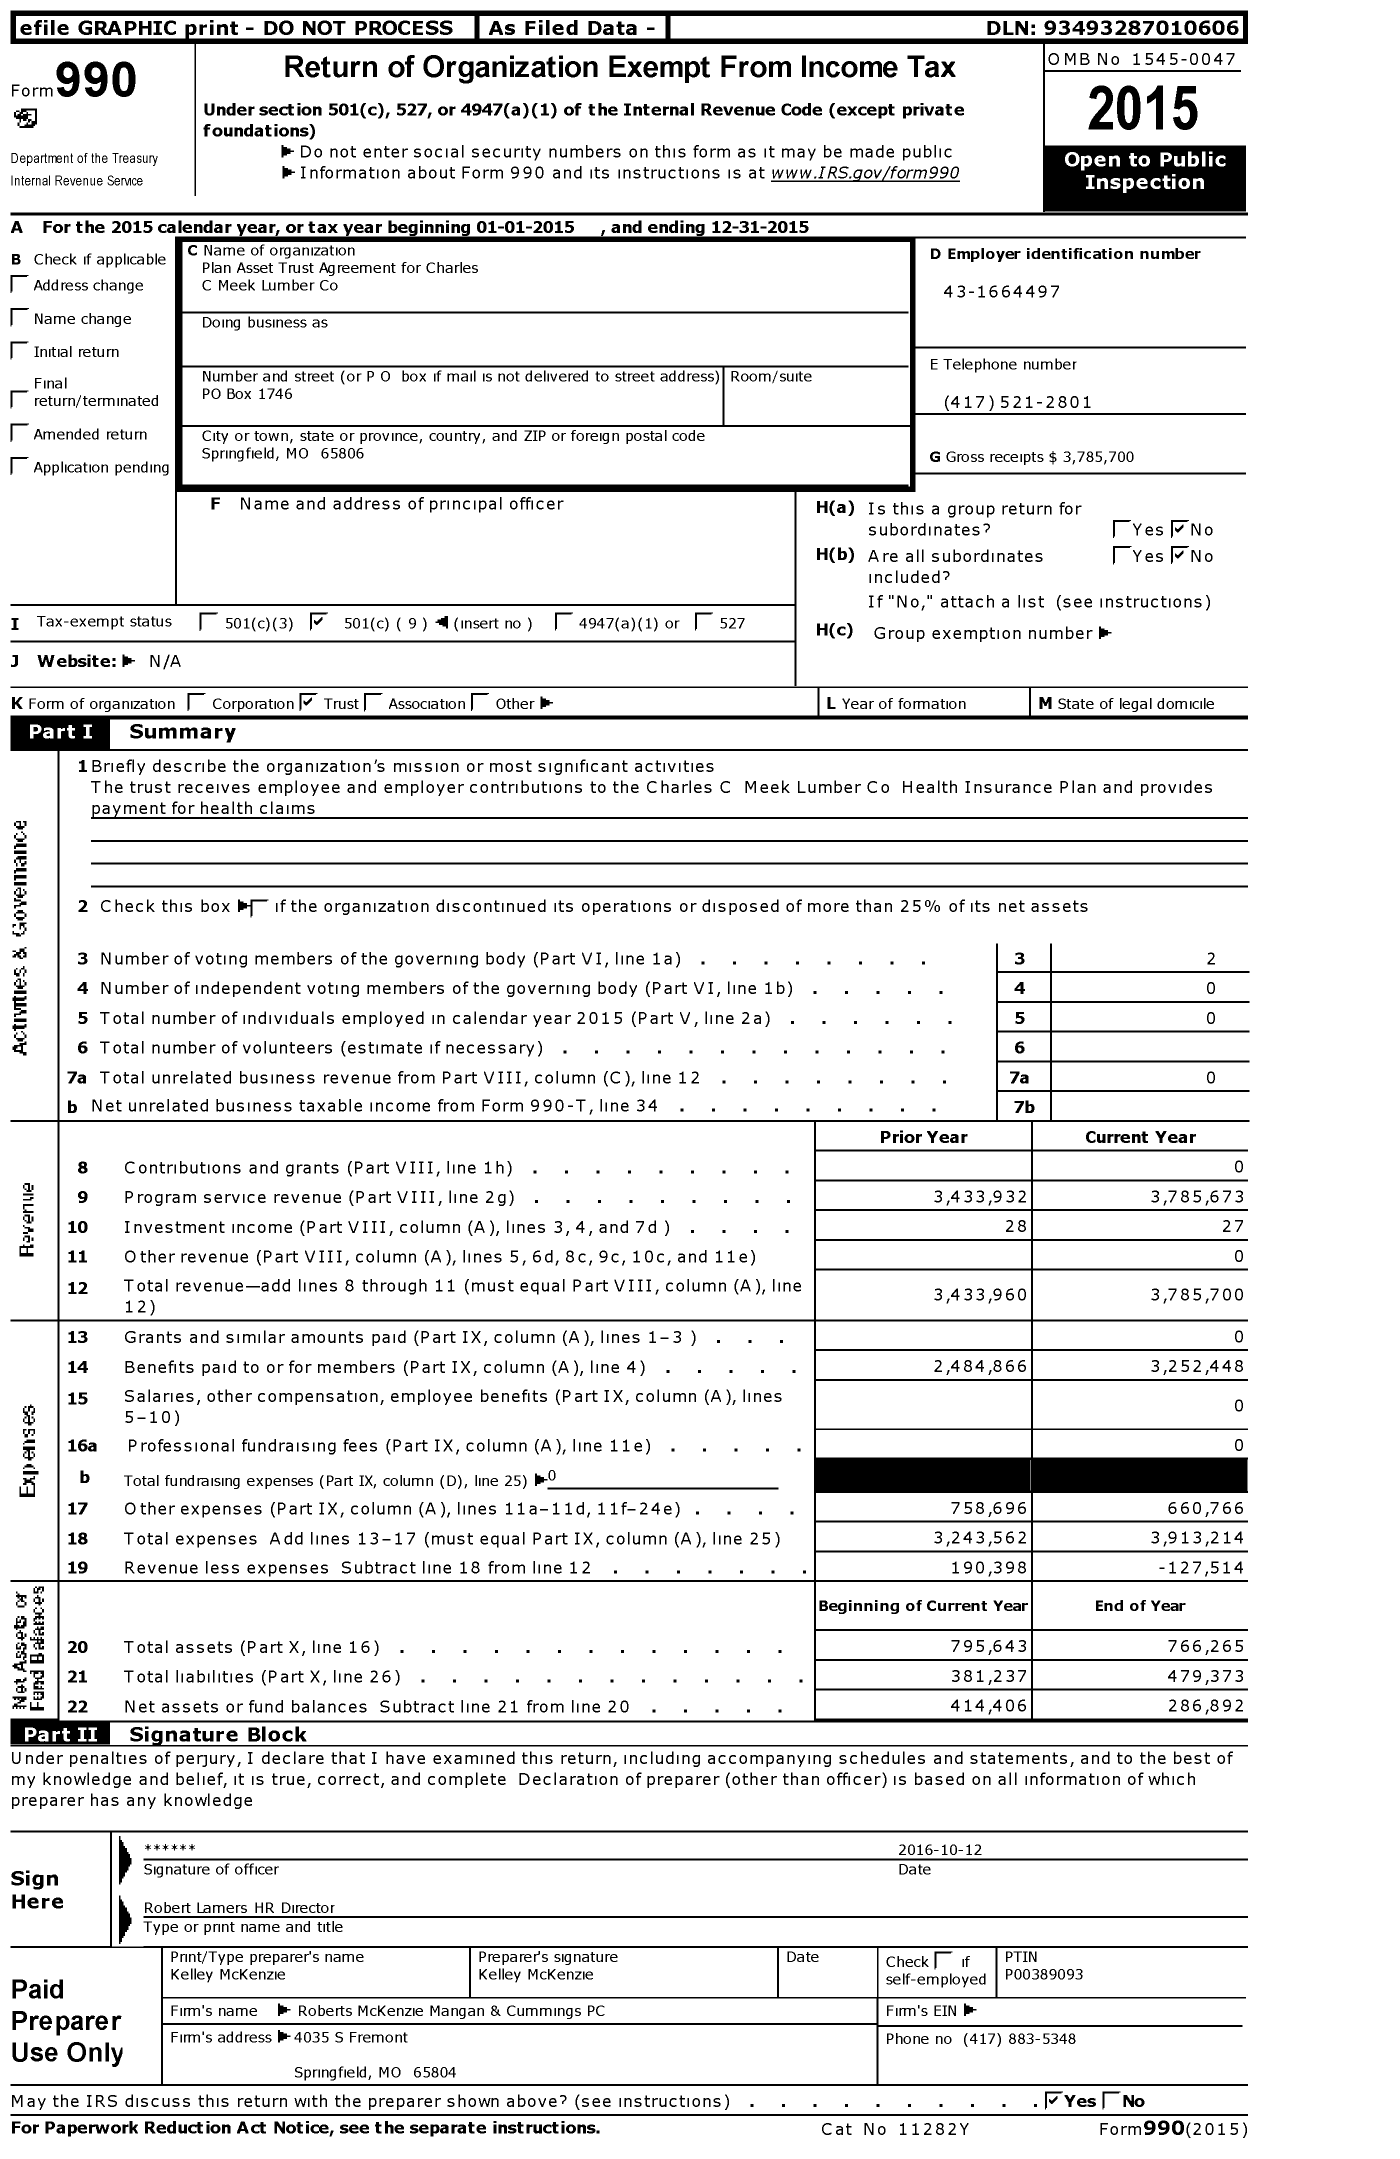 Image of first page of 2015 Form 990O for Plan Asset Trust Agreement for Charles C Meek Lumber Co